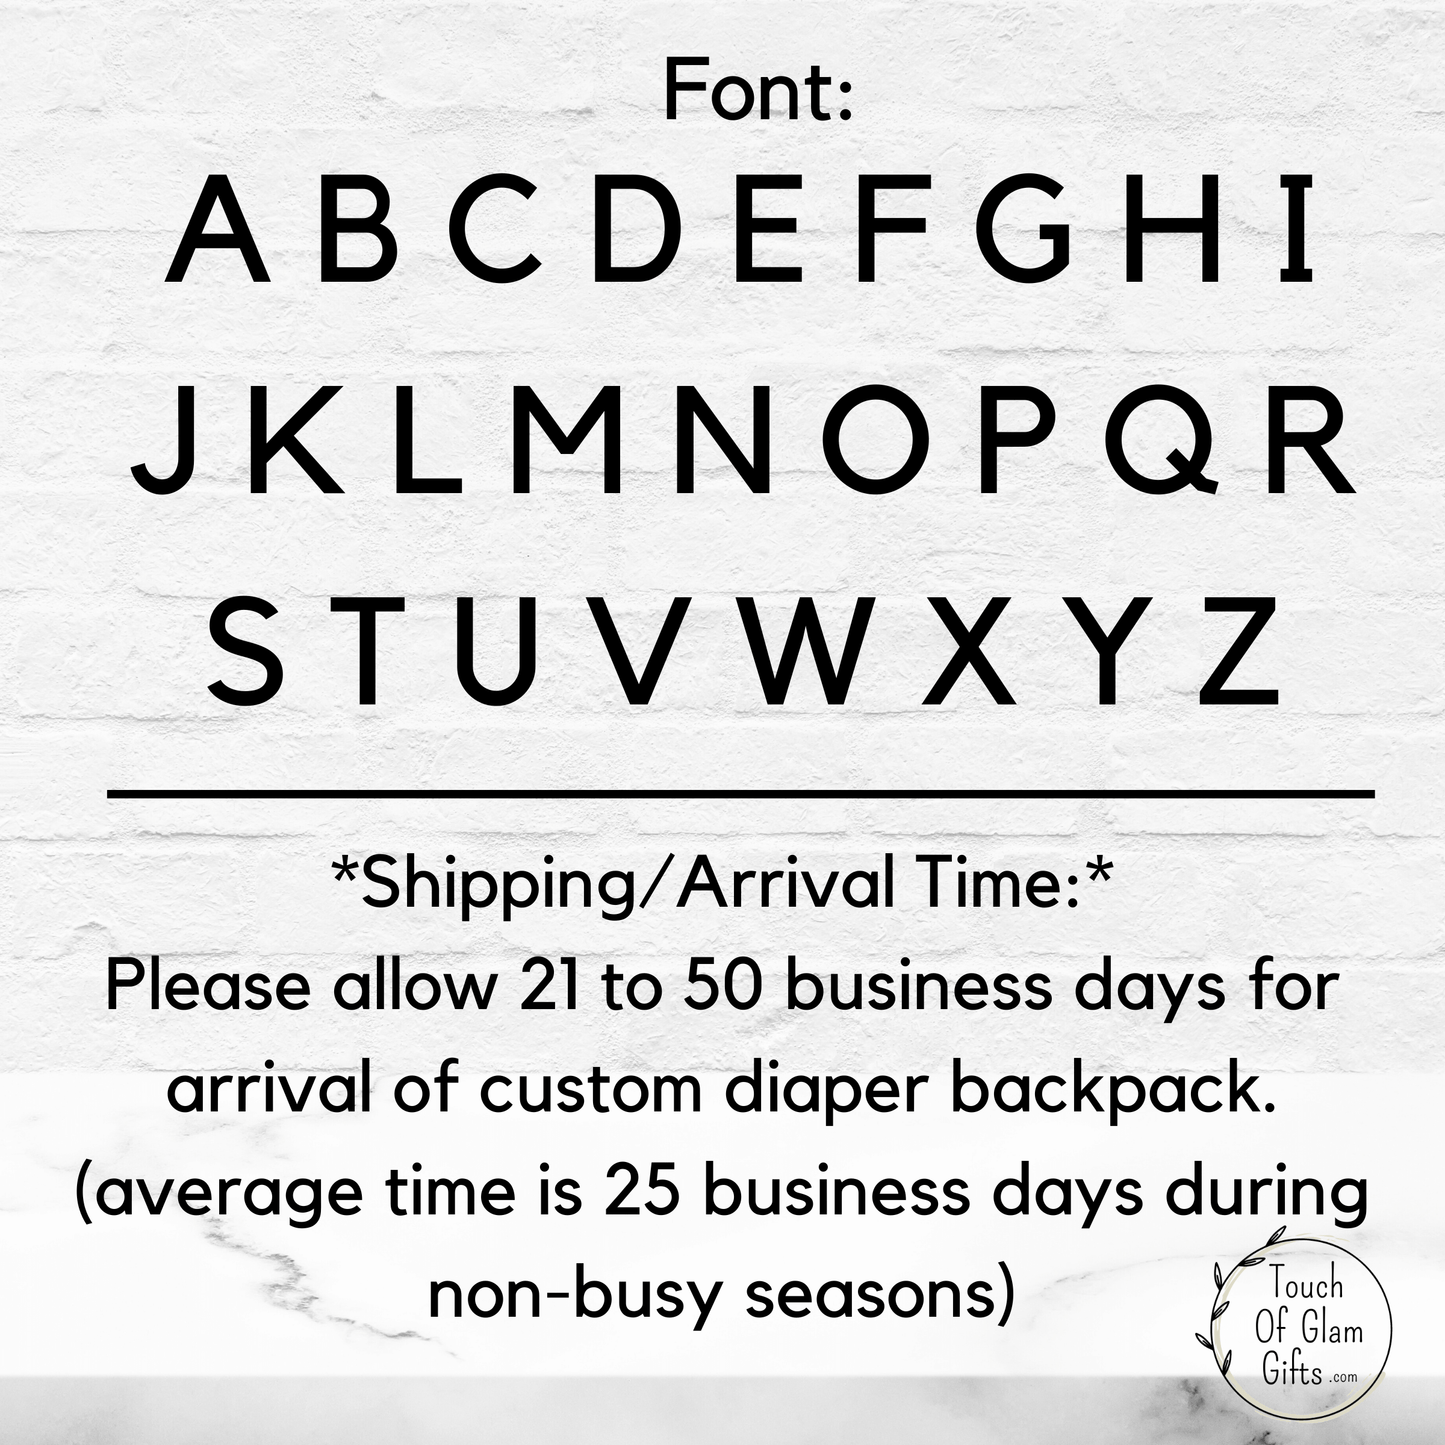 The font used for monogramming shows the entire alphabet. Our backpacks are custom made to order and average arrival time is 25 business days but please allow up to fifty business days during busy seasons.